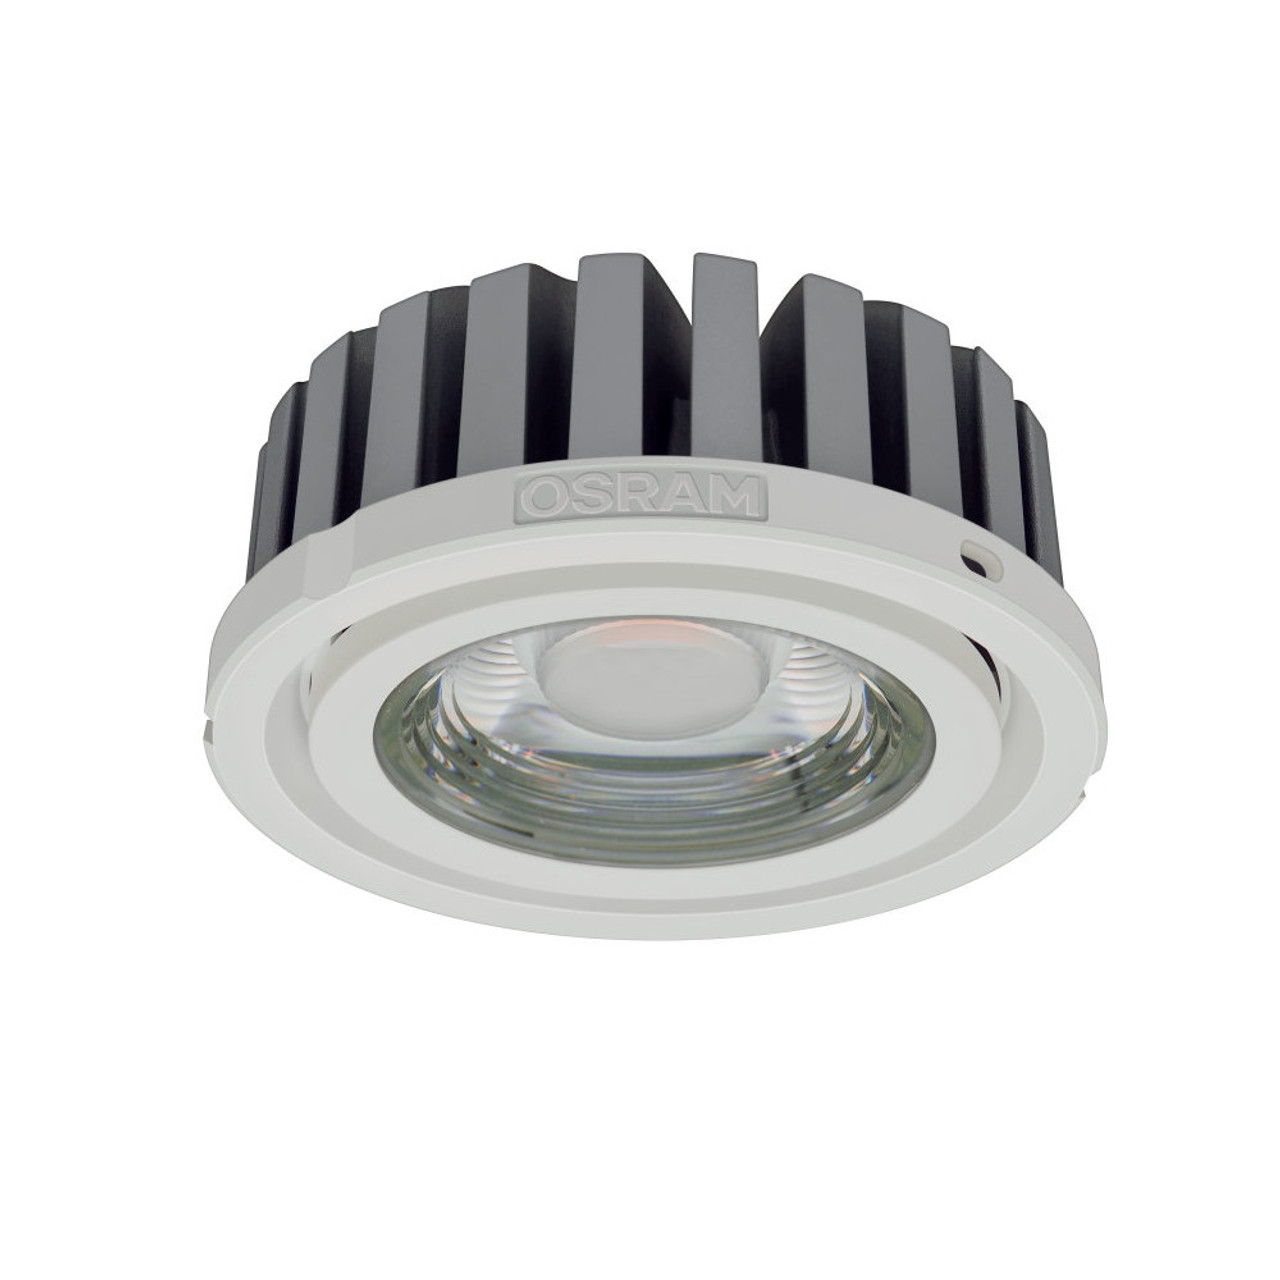 LED 1050mA Constant Current 36.8W Dimmable 930 3000K 3150lm 60 degrees COB